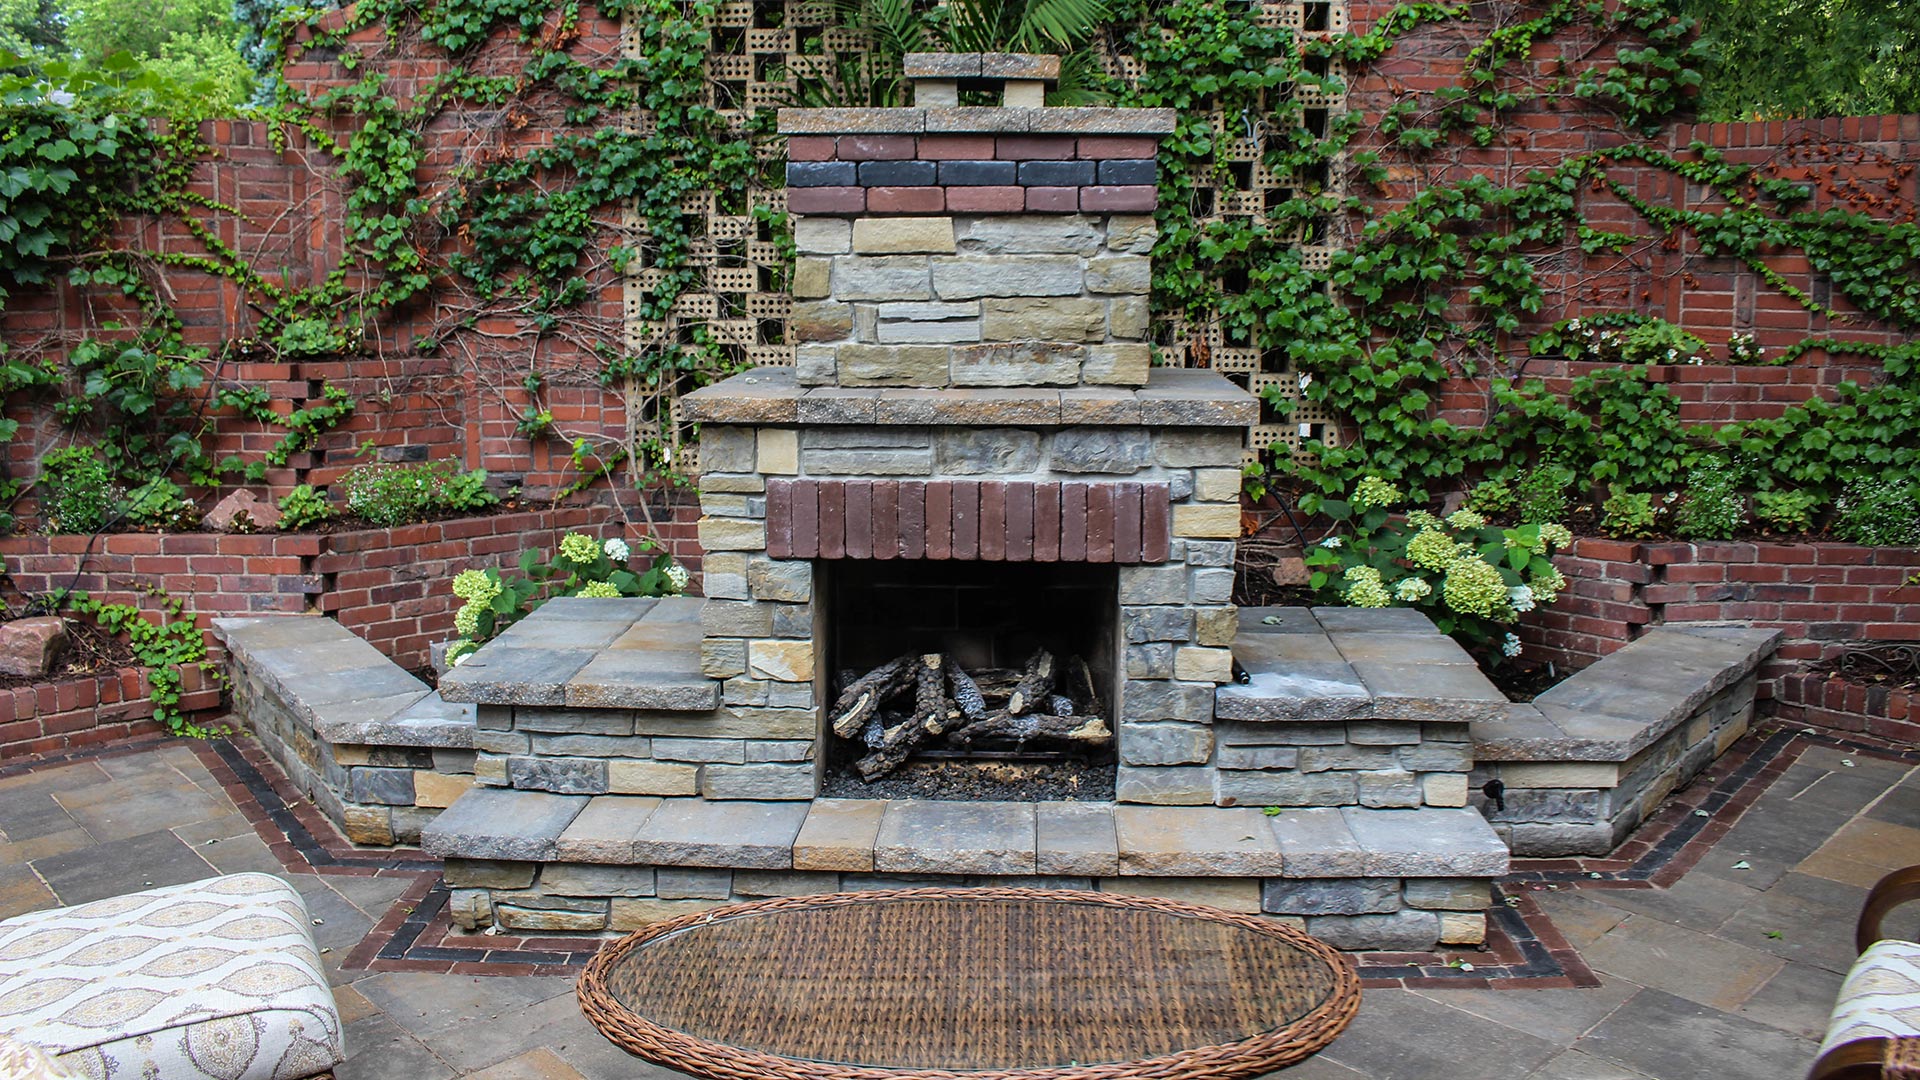 Factors to Consider When Designing Your Outdoor Fireplace